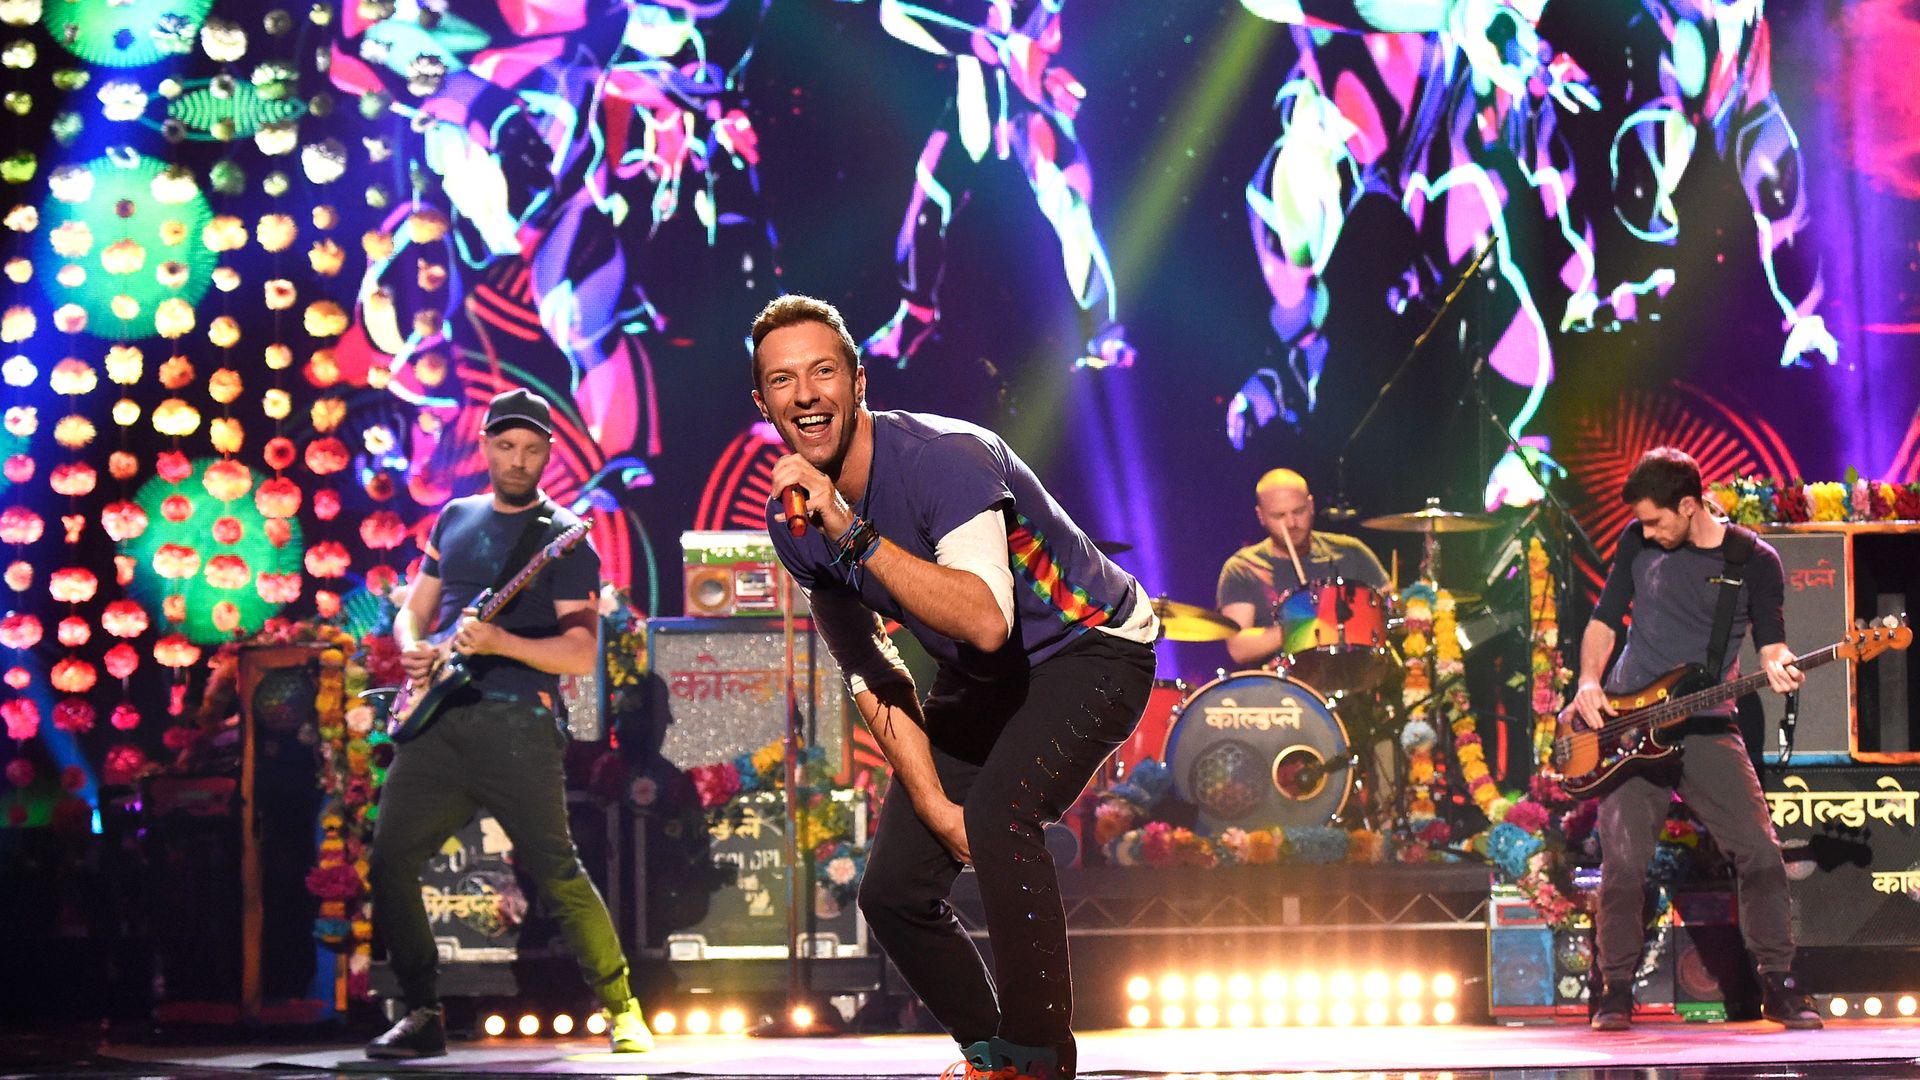 The members of the band Coldplay perform on stage in front of a bright LED screen.